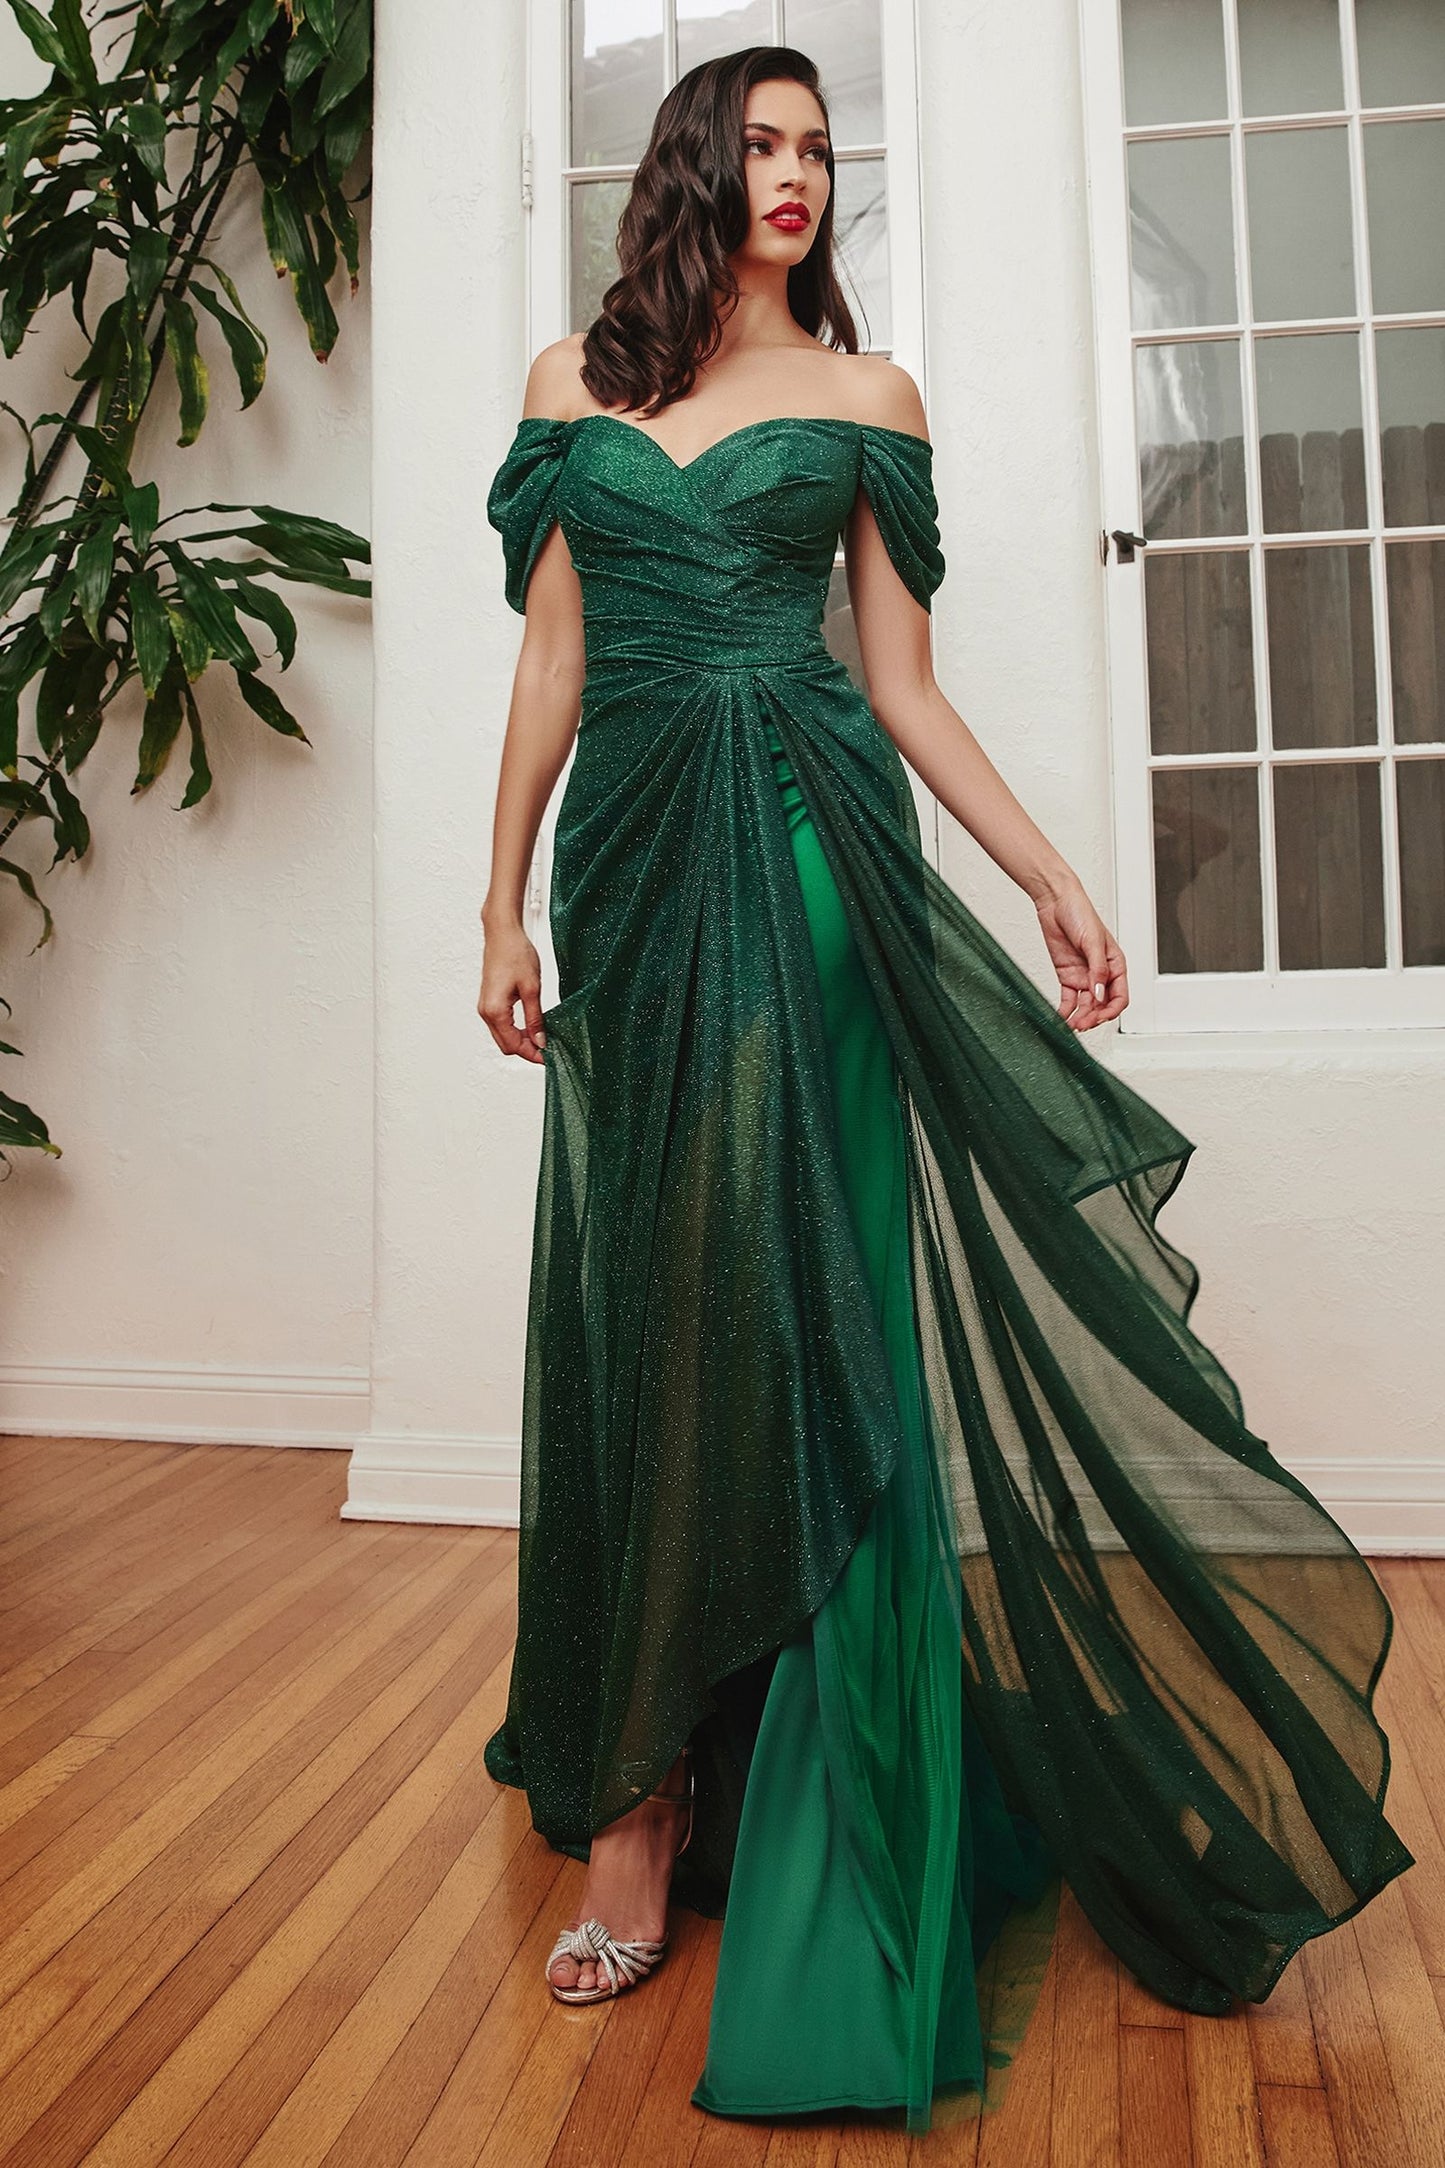 Fitted sheath style gown with dazzling glitter fabric that catches the light, adding glamour to your look.